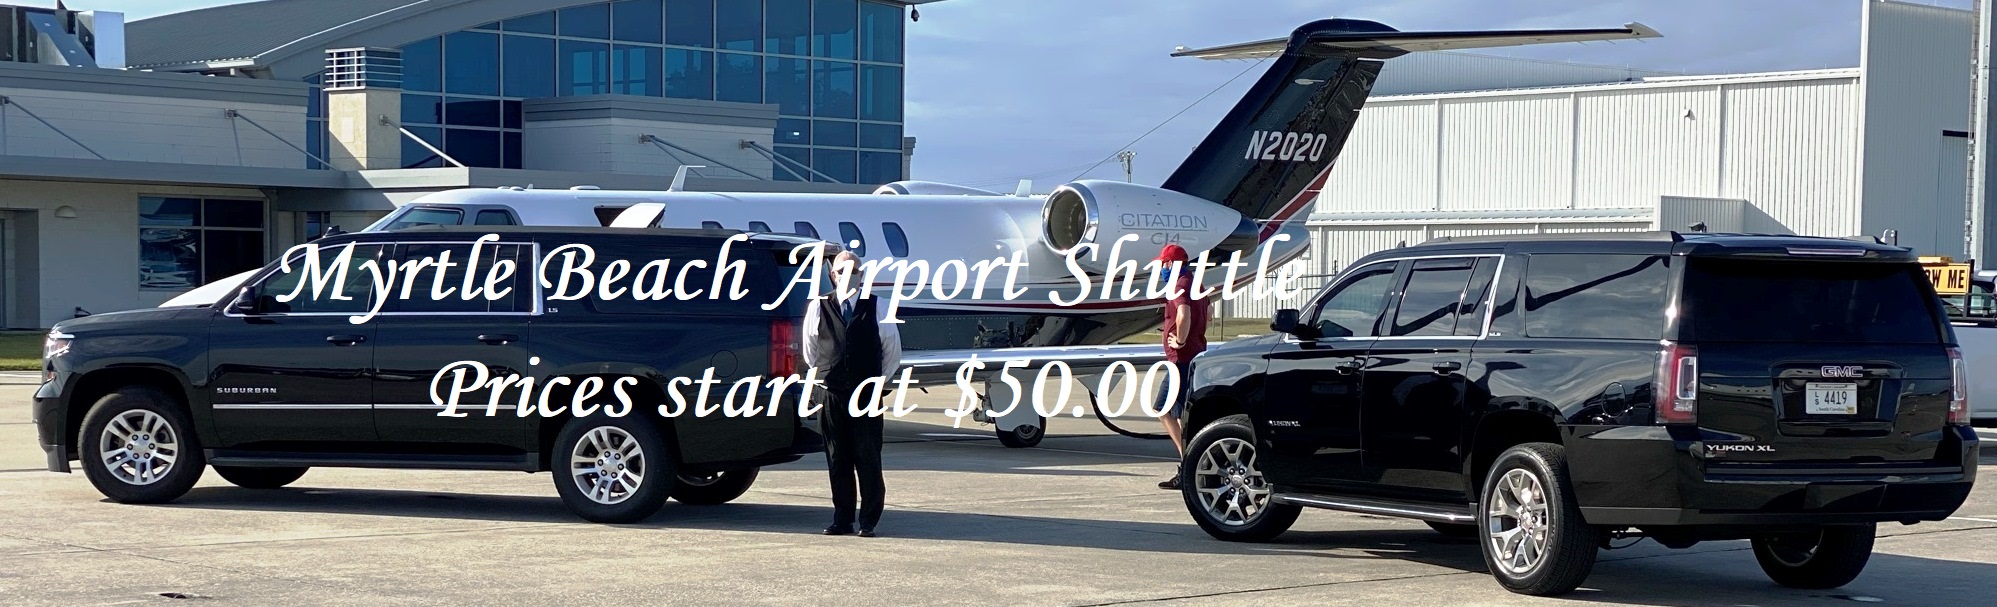 Myrtle Beach Airport Transportation Types Starting at $50.00